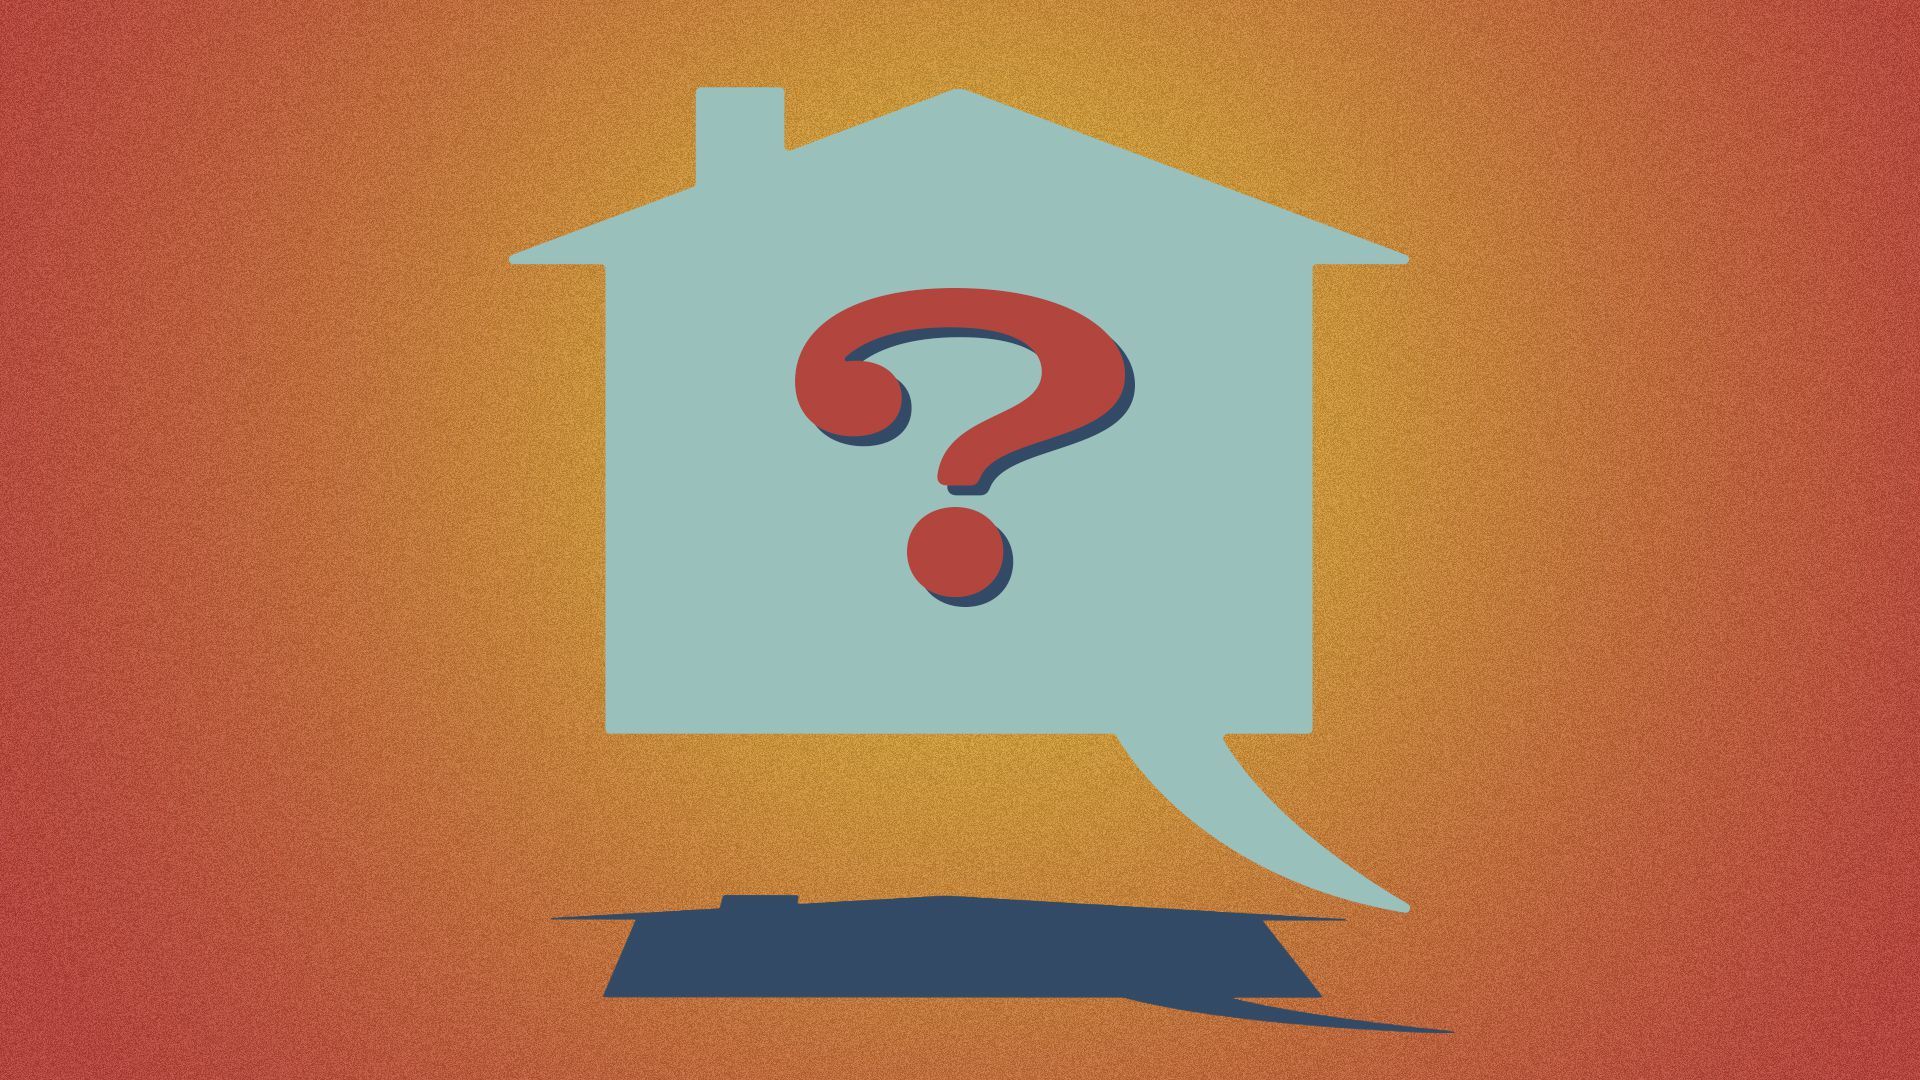 Illustration of a word balloon shaped like a house with a question mark inside it.